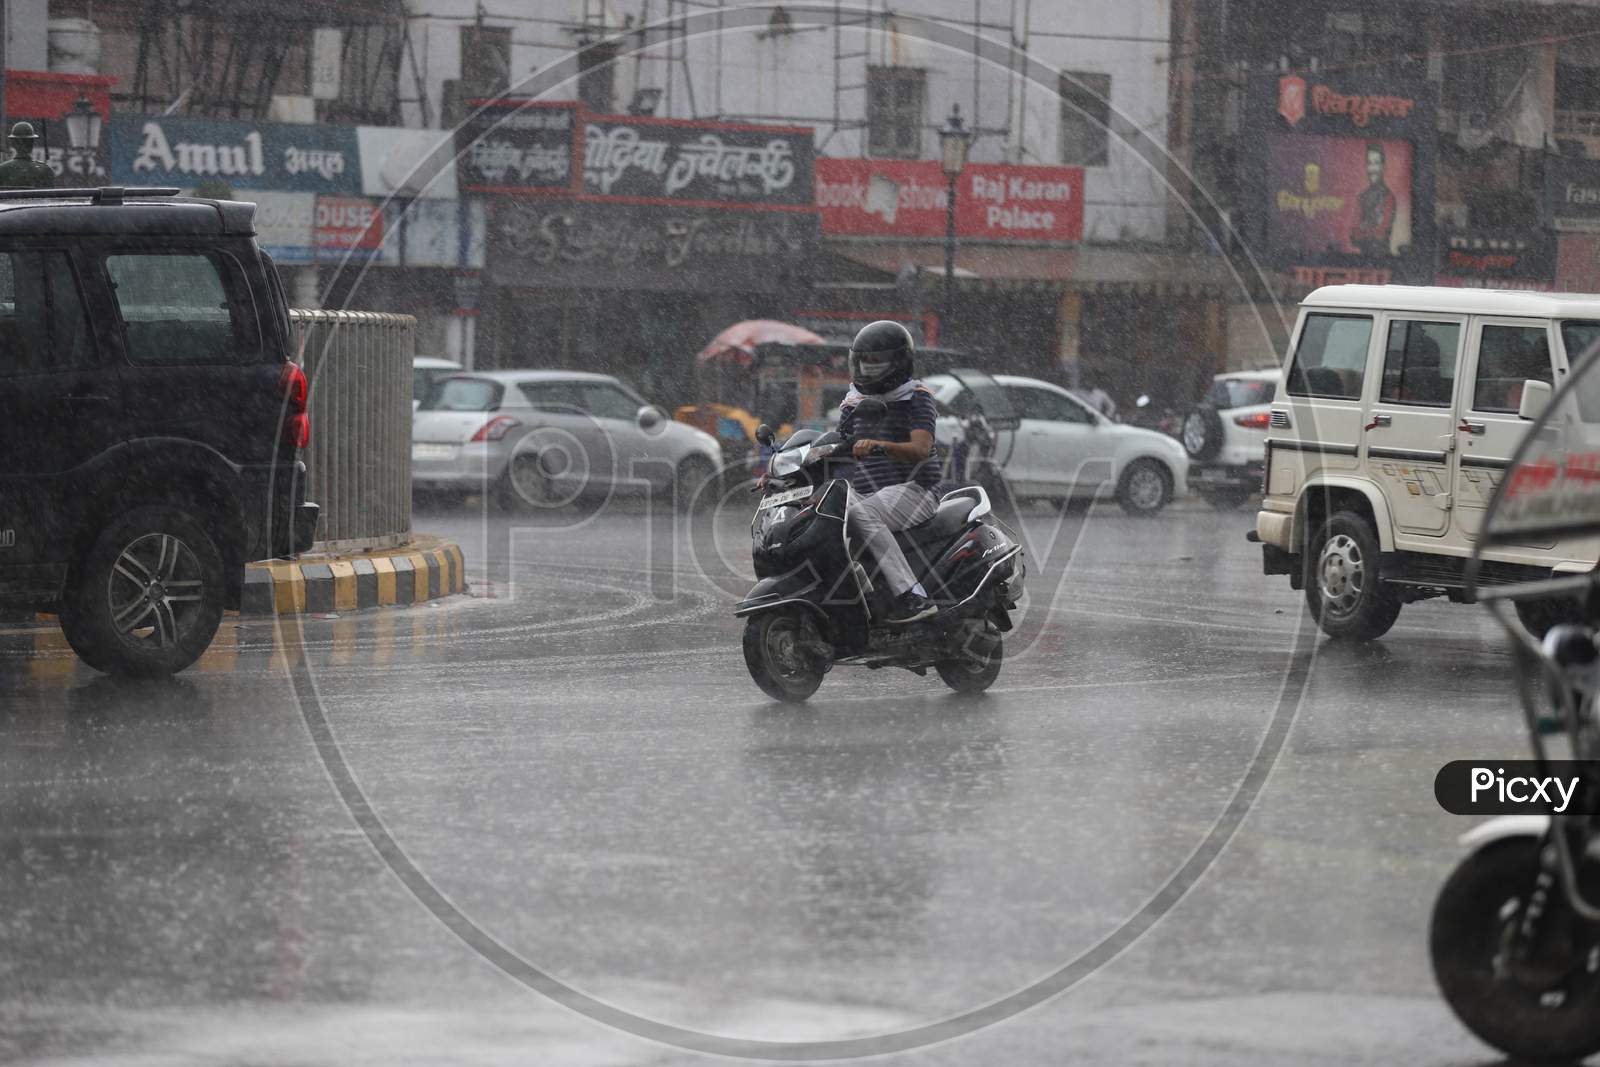 A Man Rides Scooty On The Road During Heavy Monsoon Rain In Prayagraj, June 25, 2020